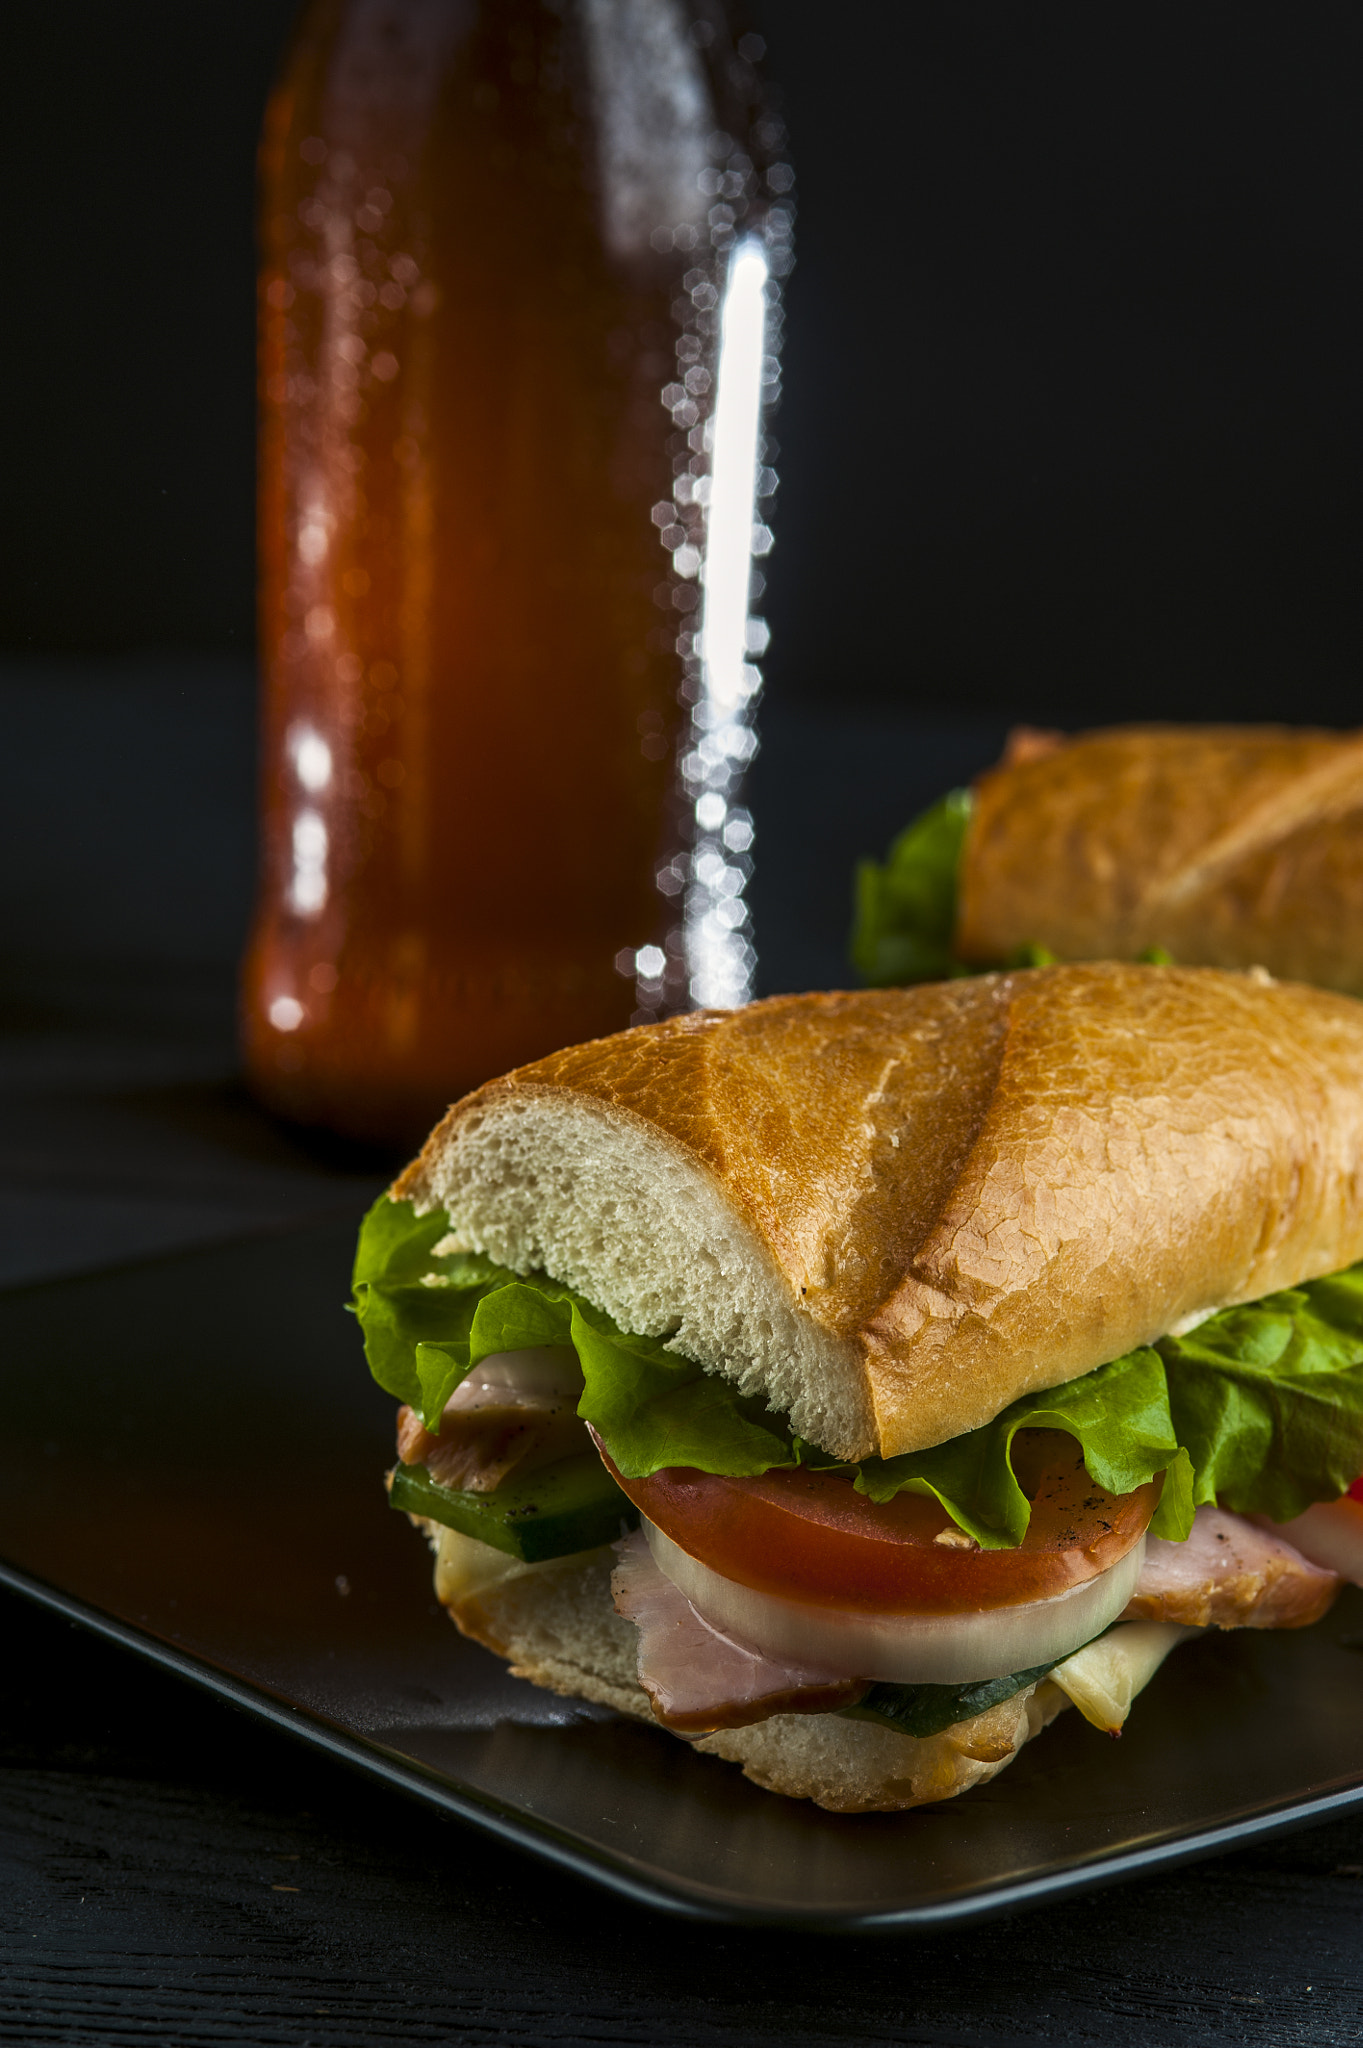 Nikon D700 + AF Micro-Nikkor 105mm f/2.8 sample photo. Sandwich with ham and vegetables and beer bottle on dark background photography